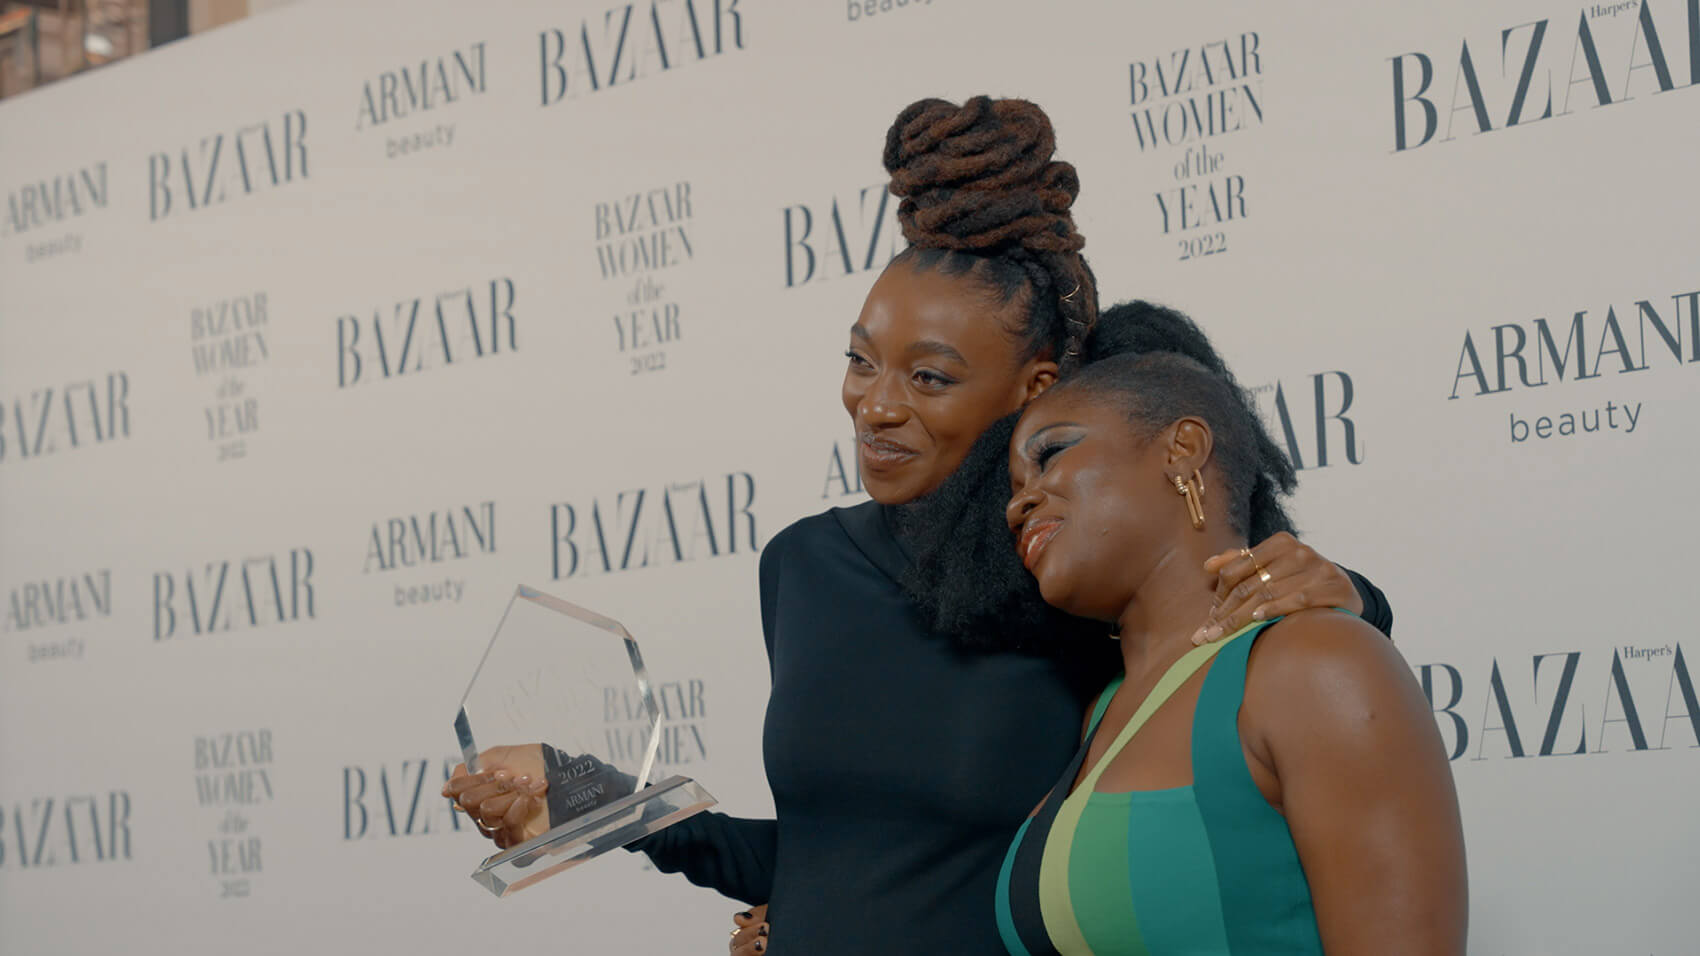 Musician Little Simz and presenter Clara Amfo on stage at the Women of the Year 2022, an event videos project for Harper's Bazaar